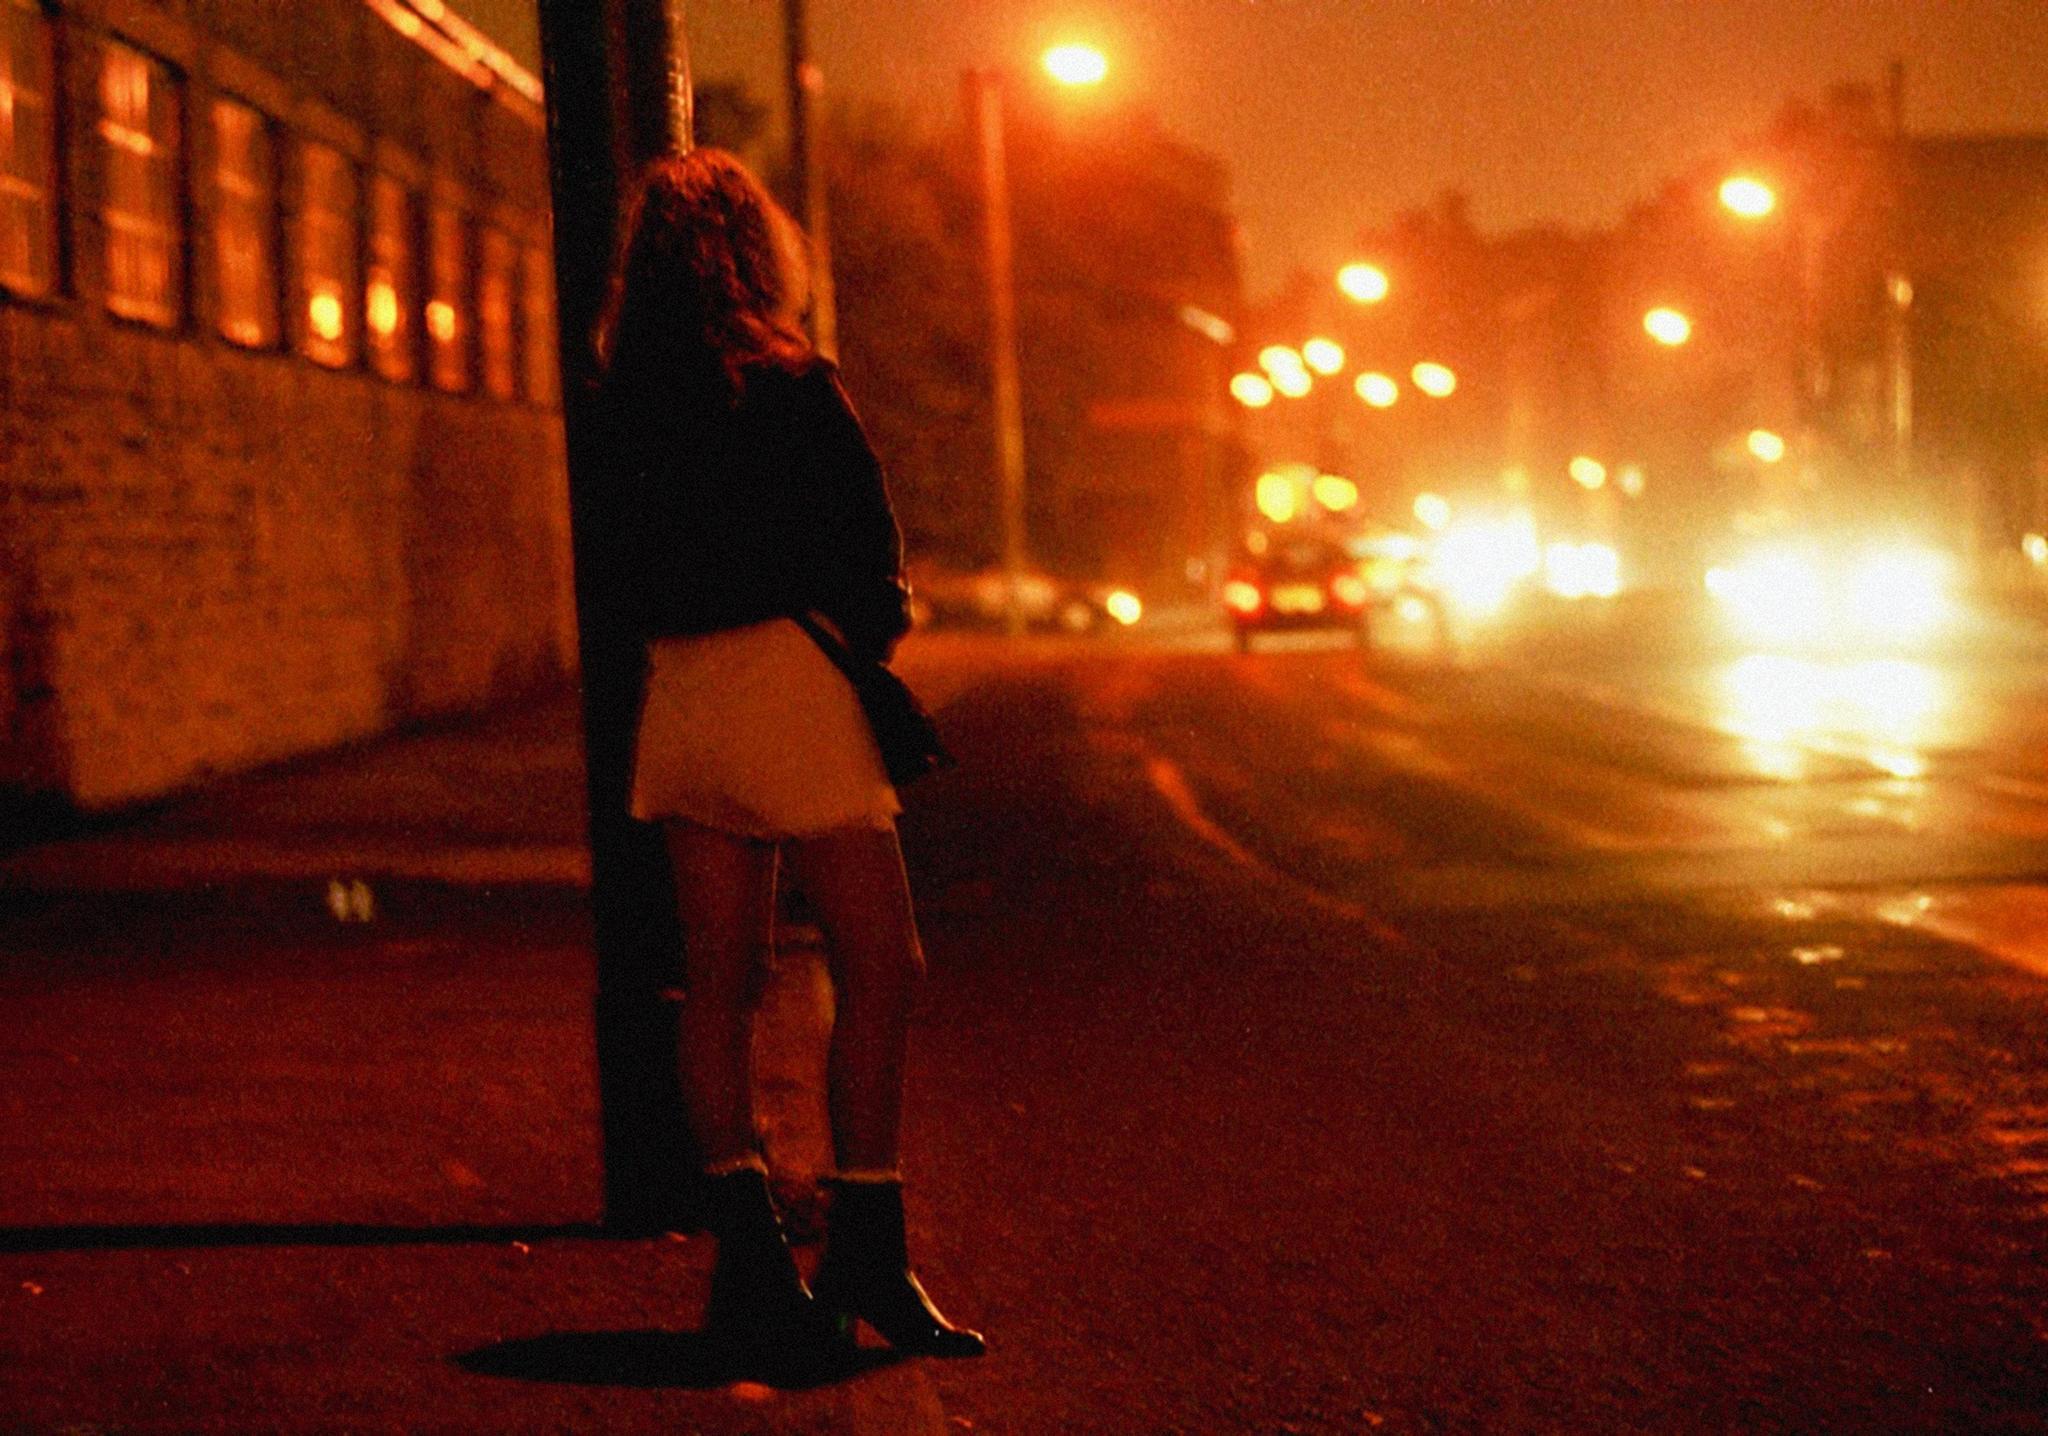 Sex workers aim to shape the future of Scotland's prostitution laws